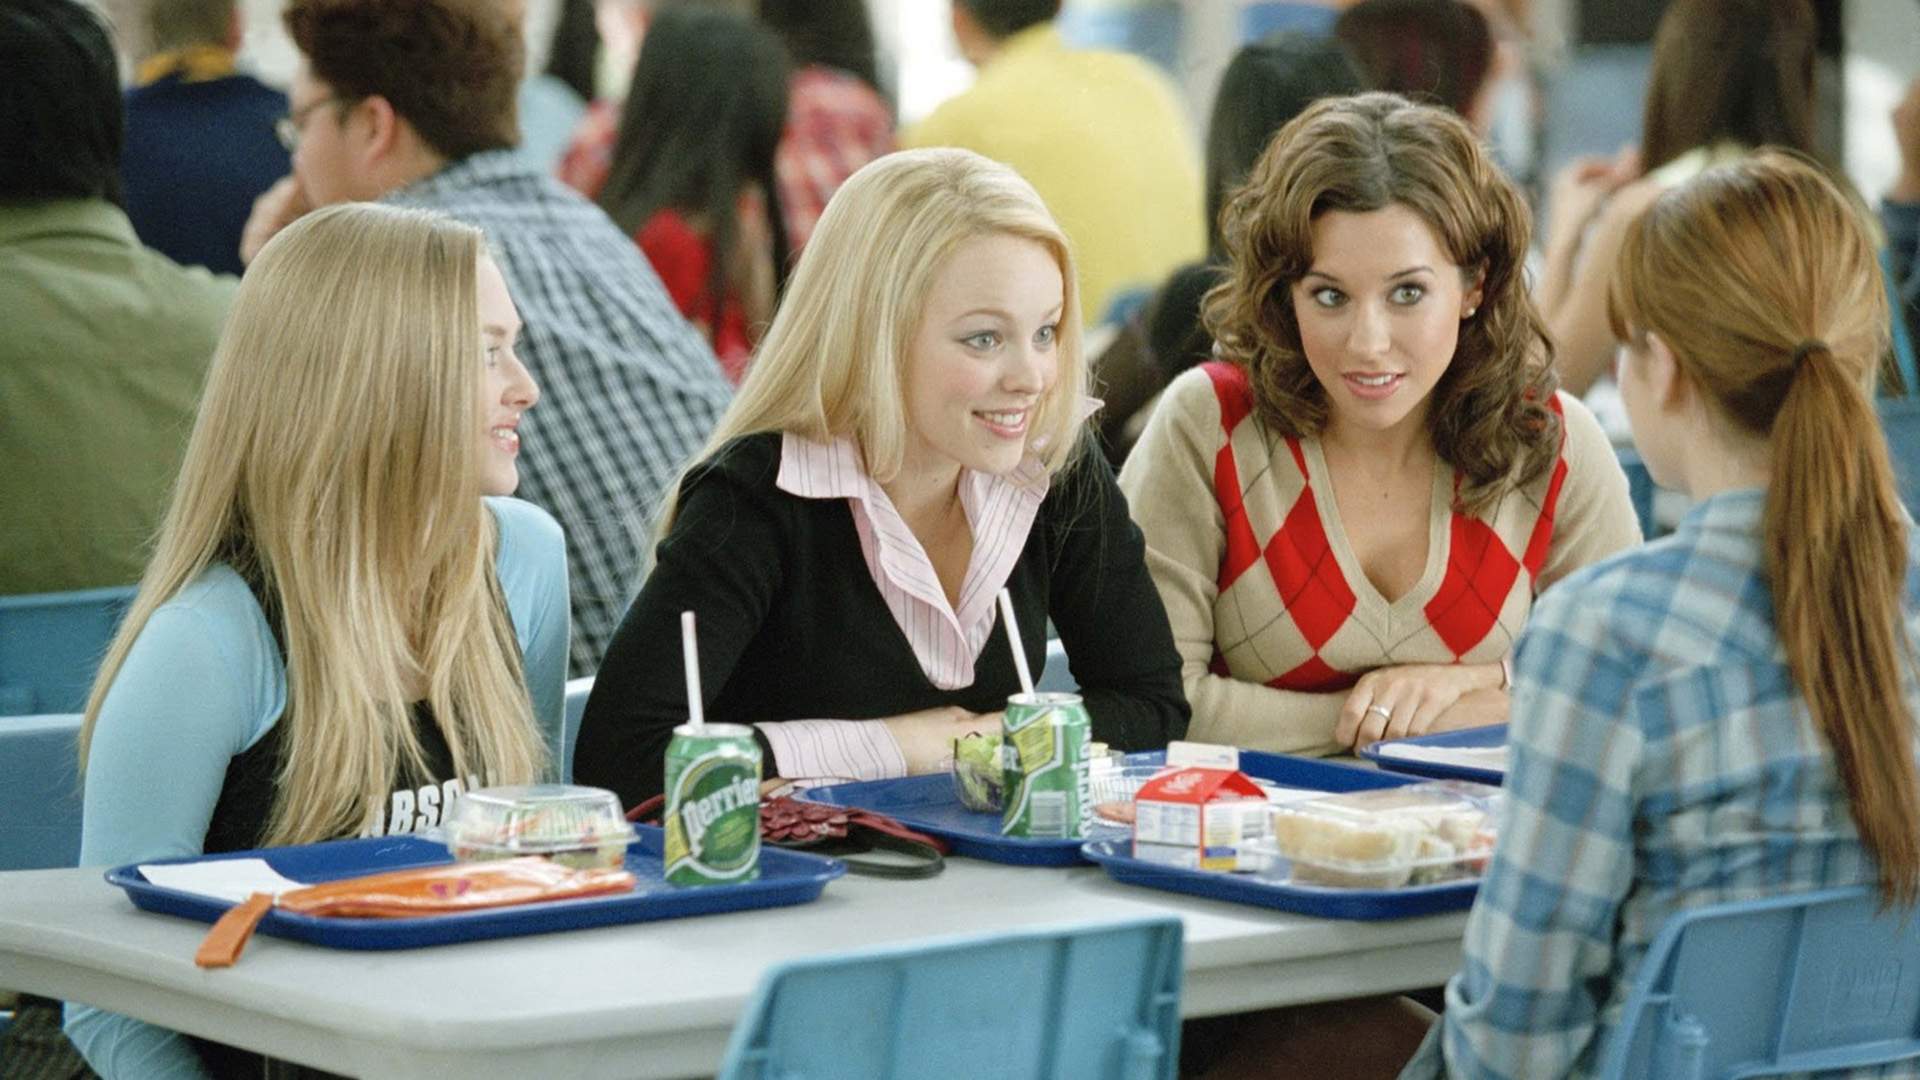 'Clueless' and 'Mean Girls' Drive-In Double